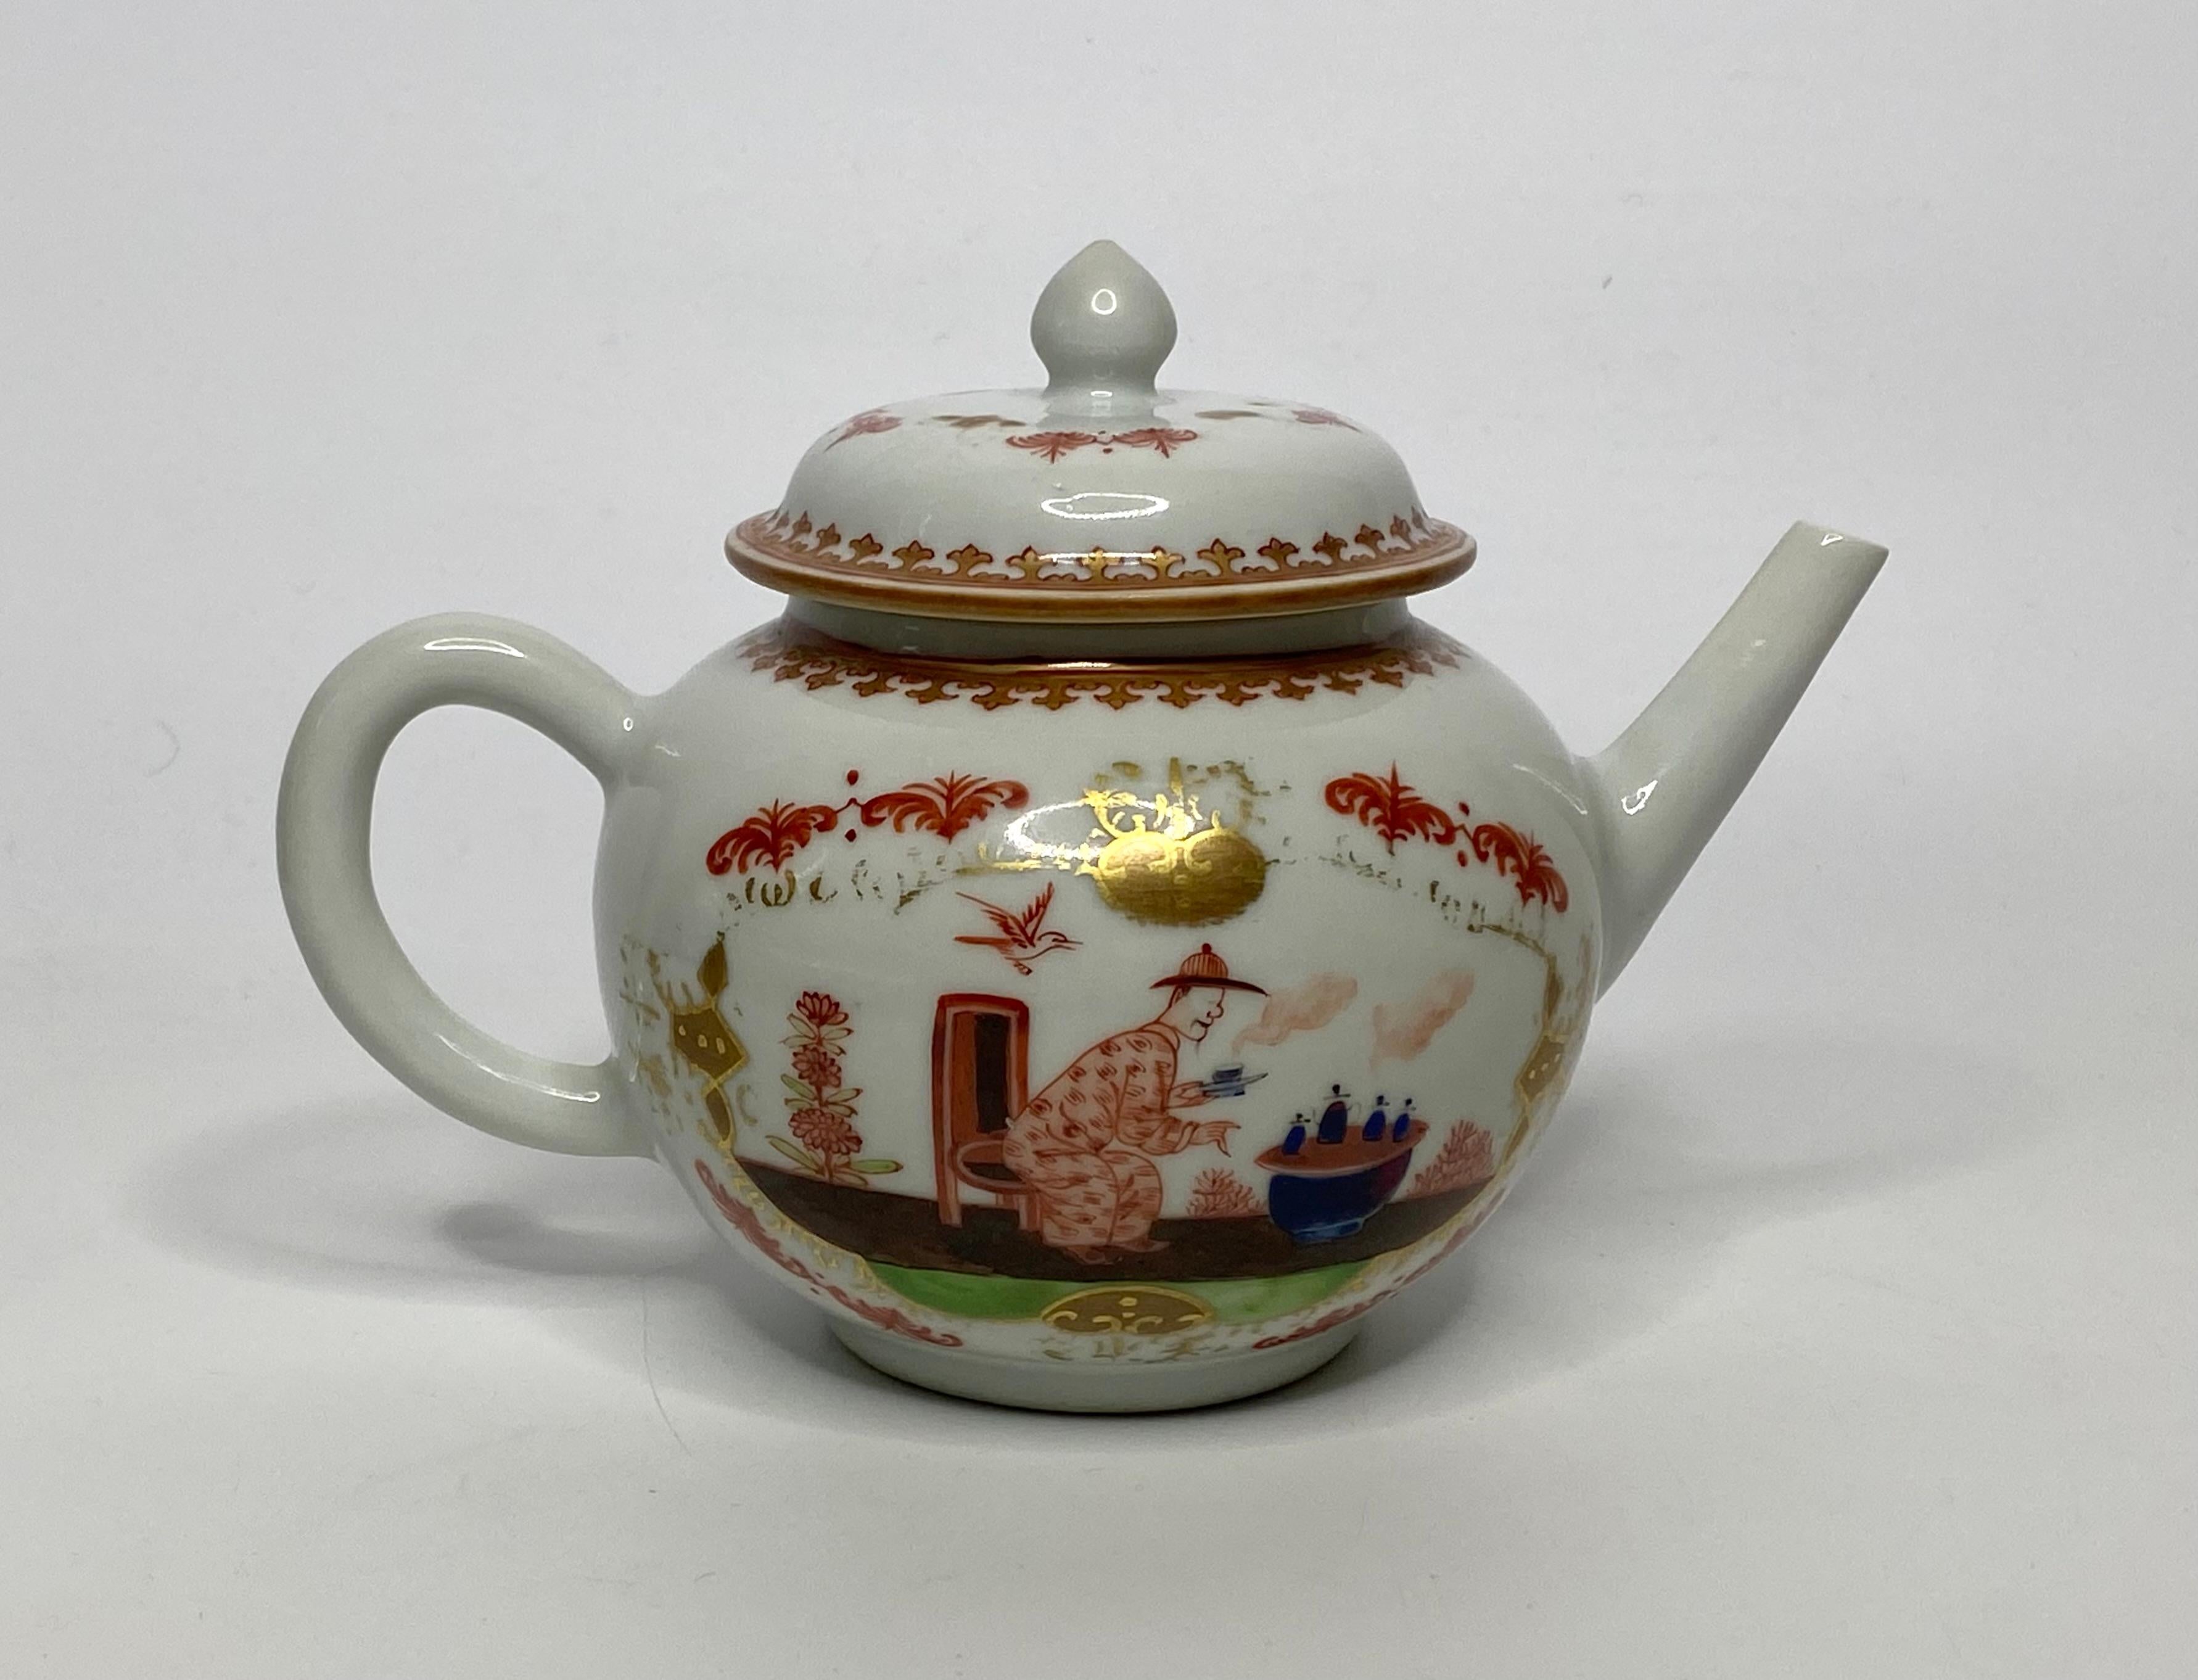 Fired Chinese porcelain teapot, Meissen style, c. 1750, Qianlong Period. For Sale